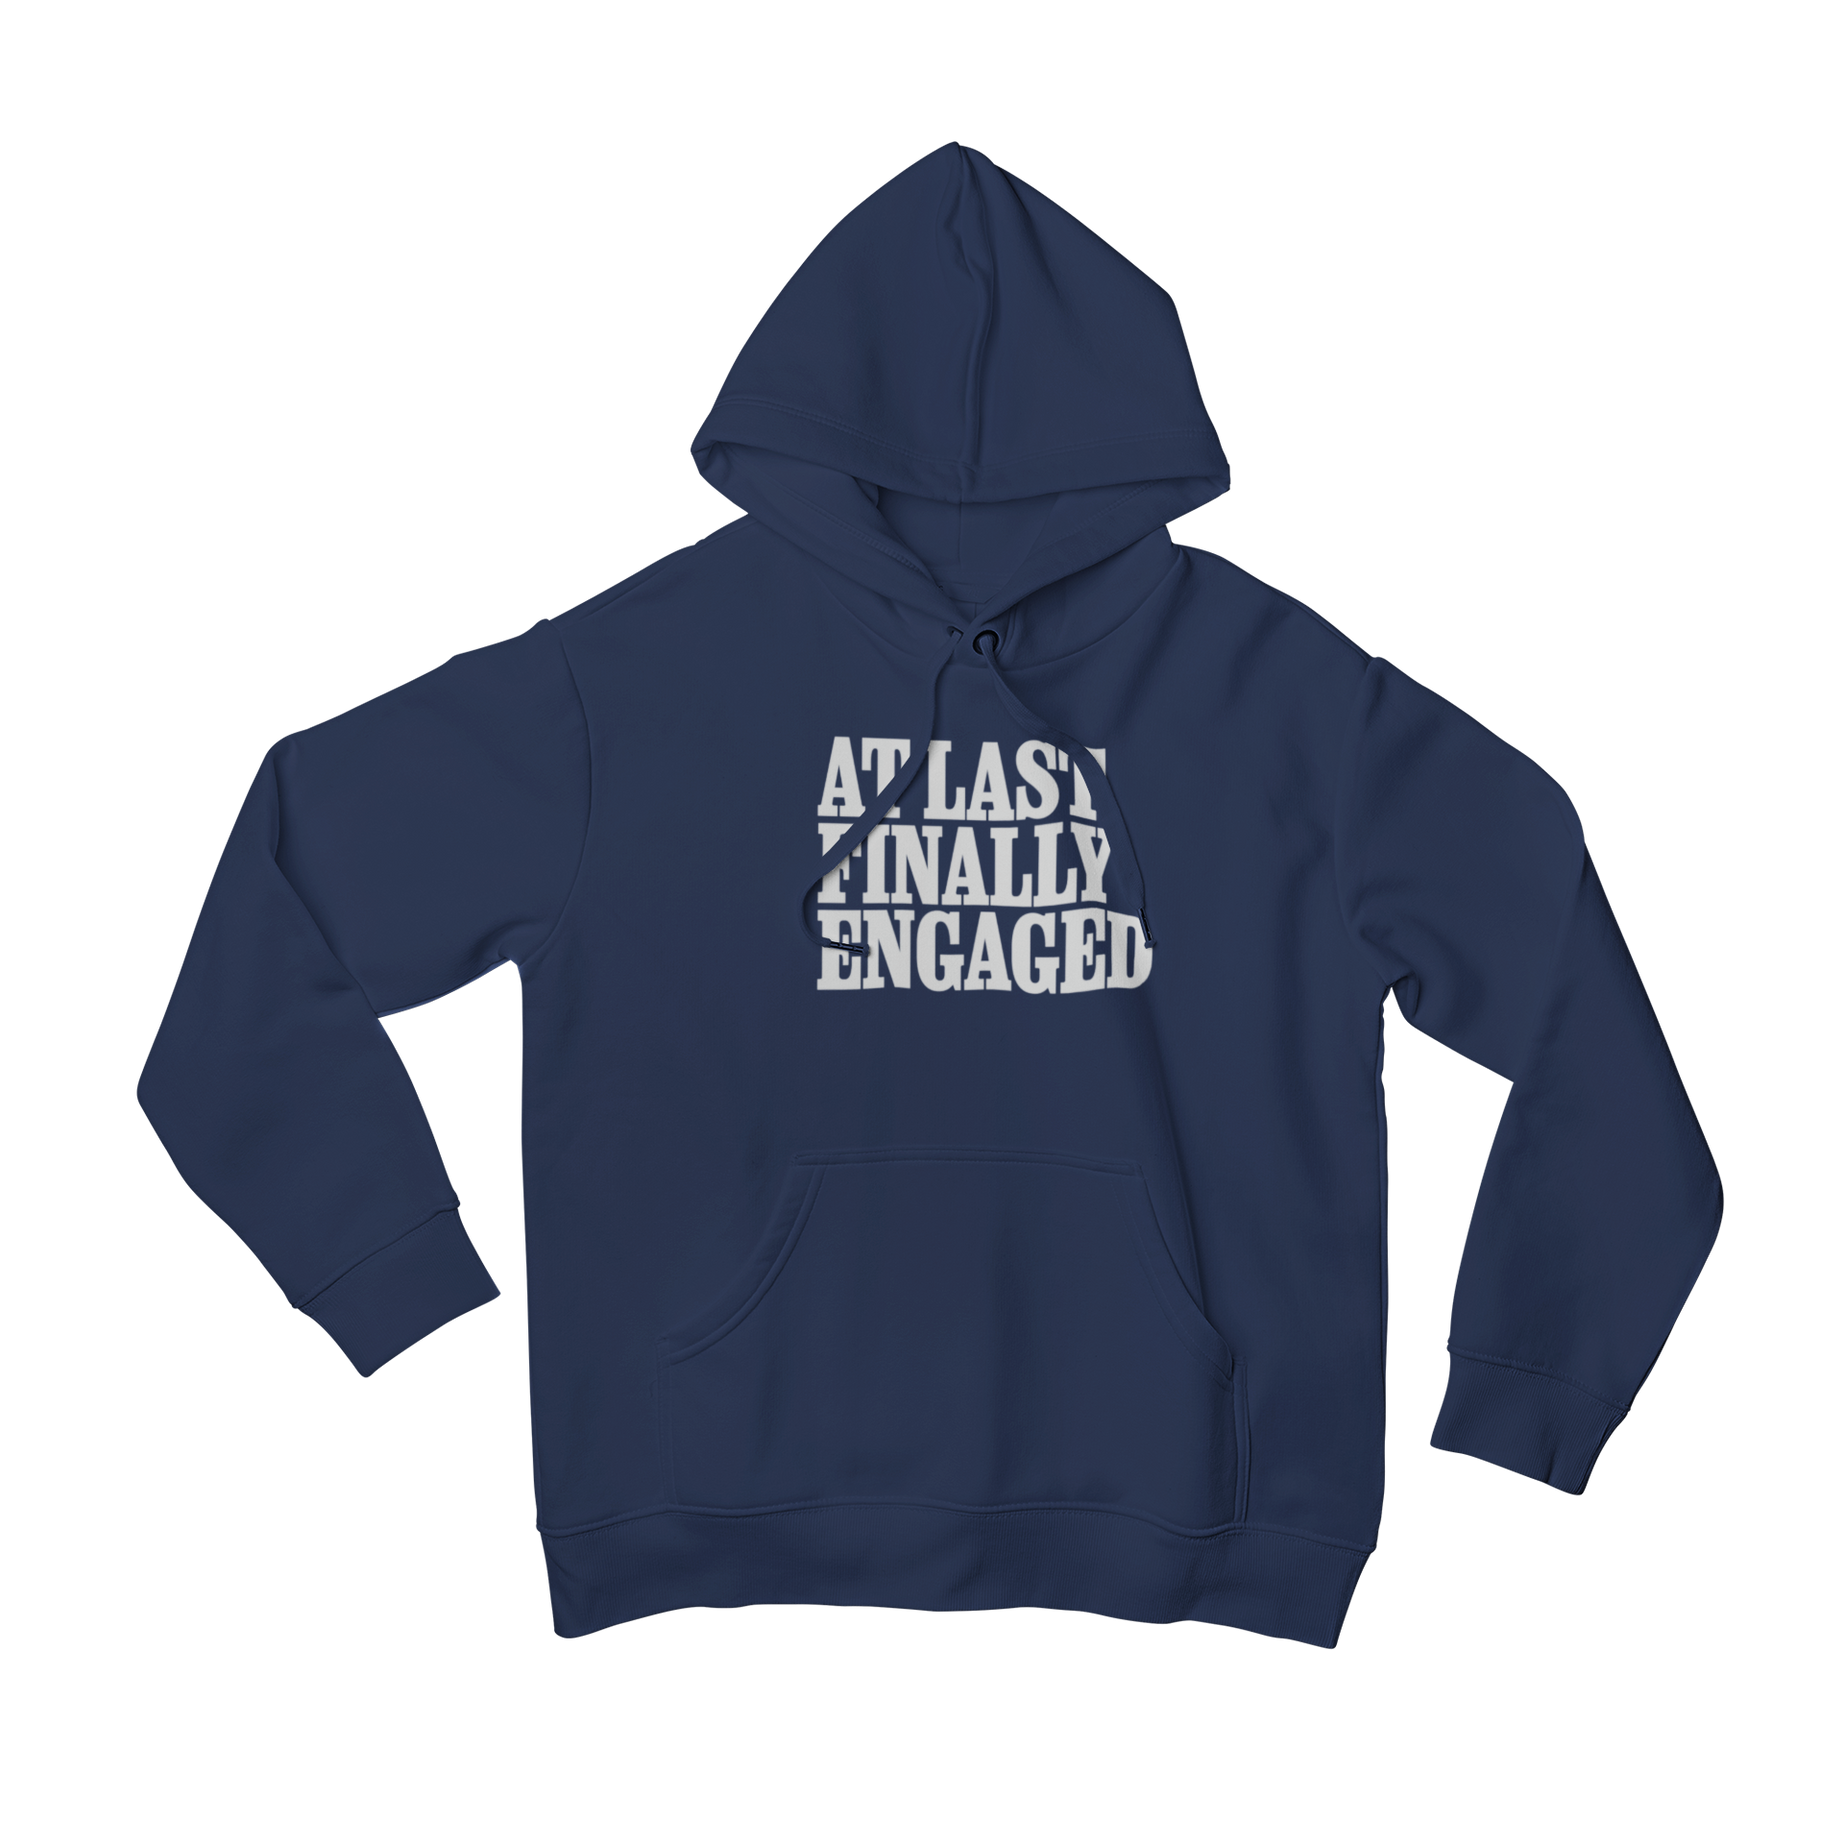 At Last Engaged hoodie with slogan, perfect for newly engaged couples. Celebrate and show off your love with this comfortable matching set. Expertly designed for the happiest moments in life.